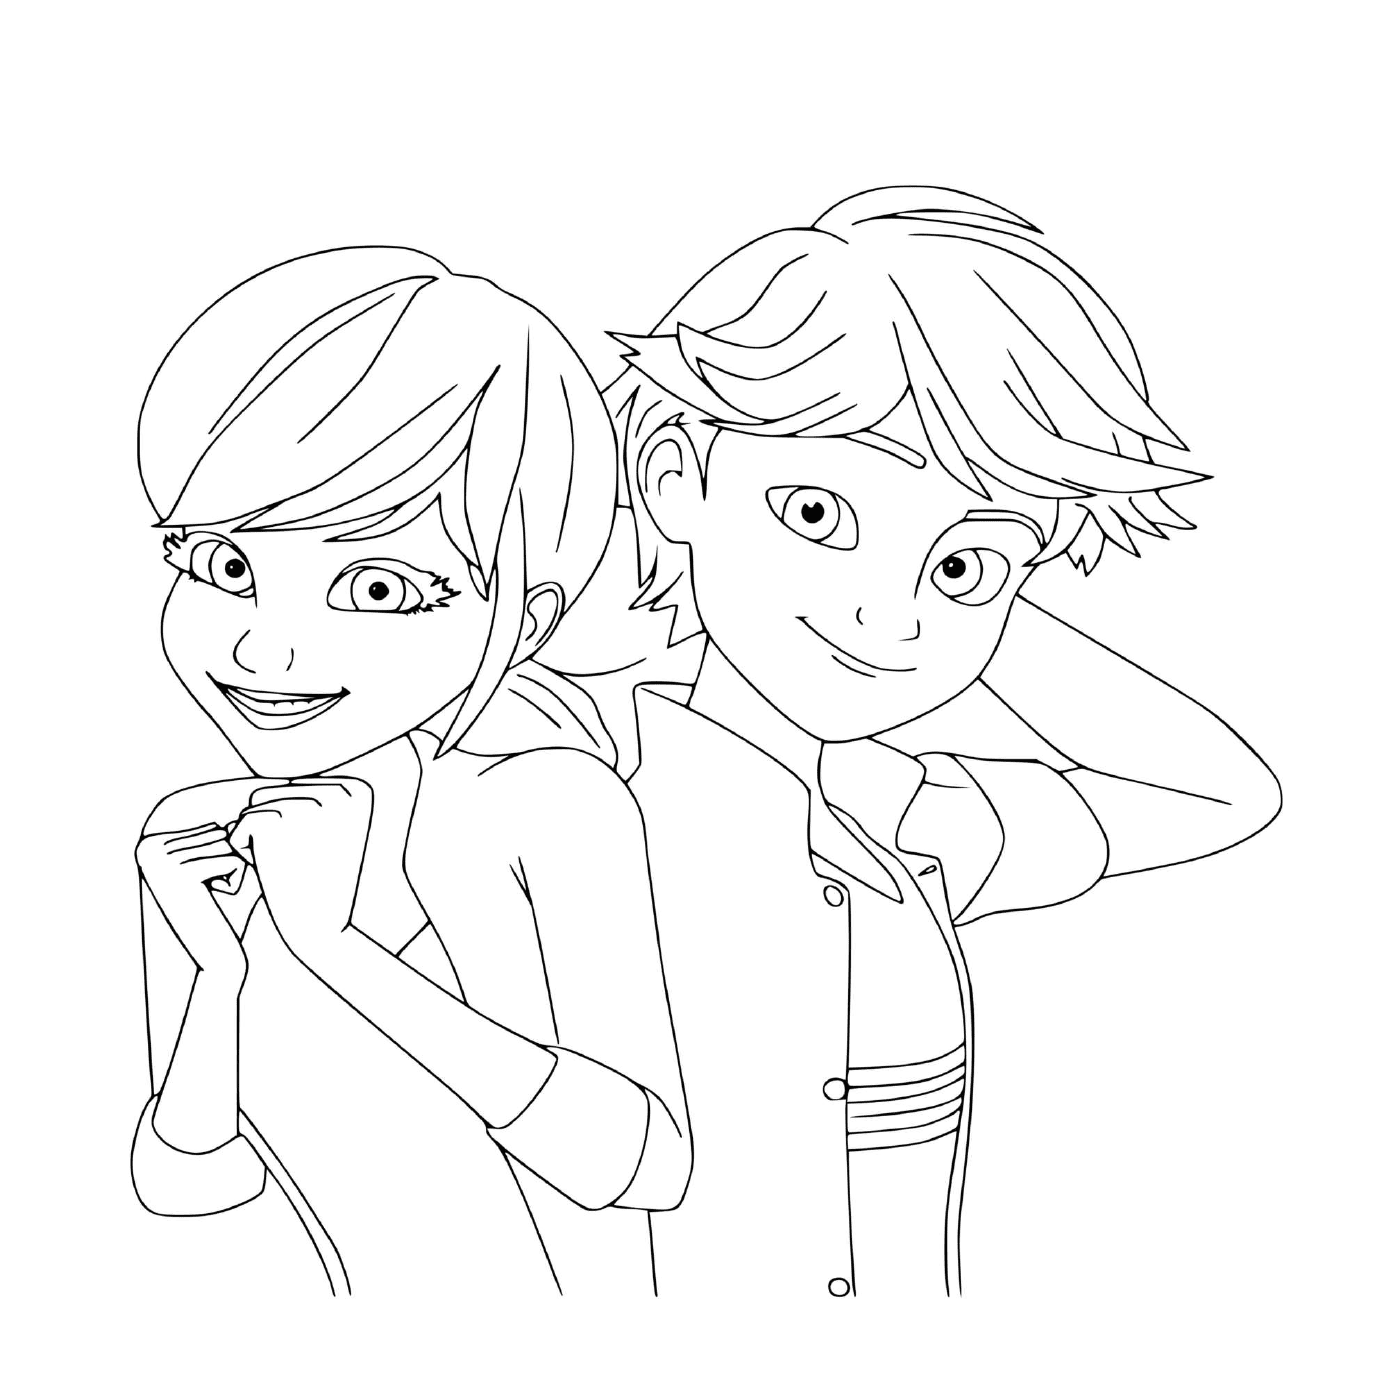  Marinette and Adrien, accomplices 